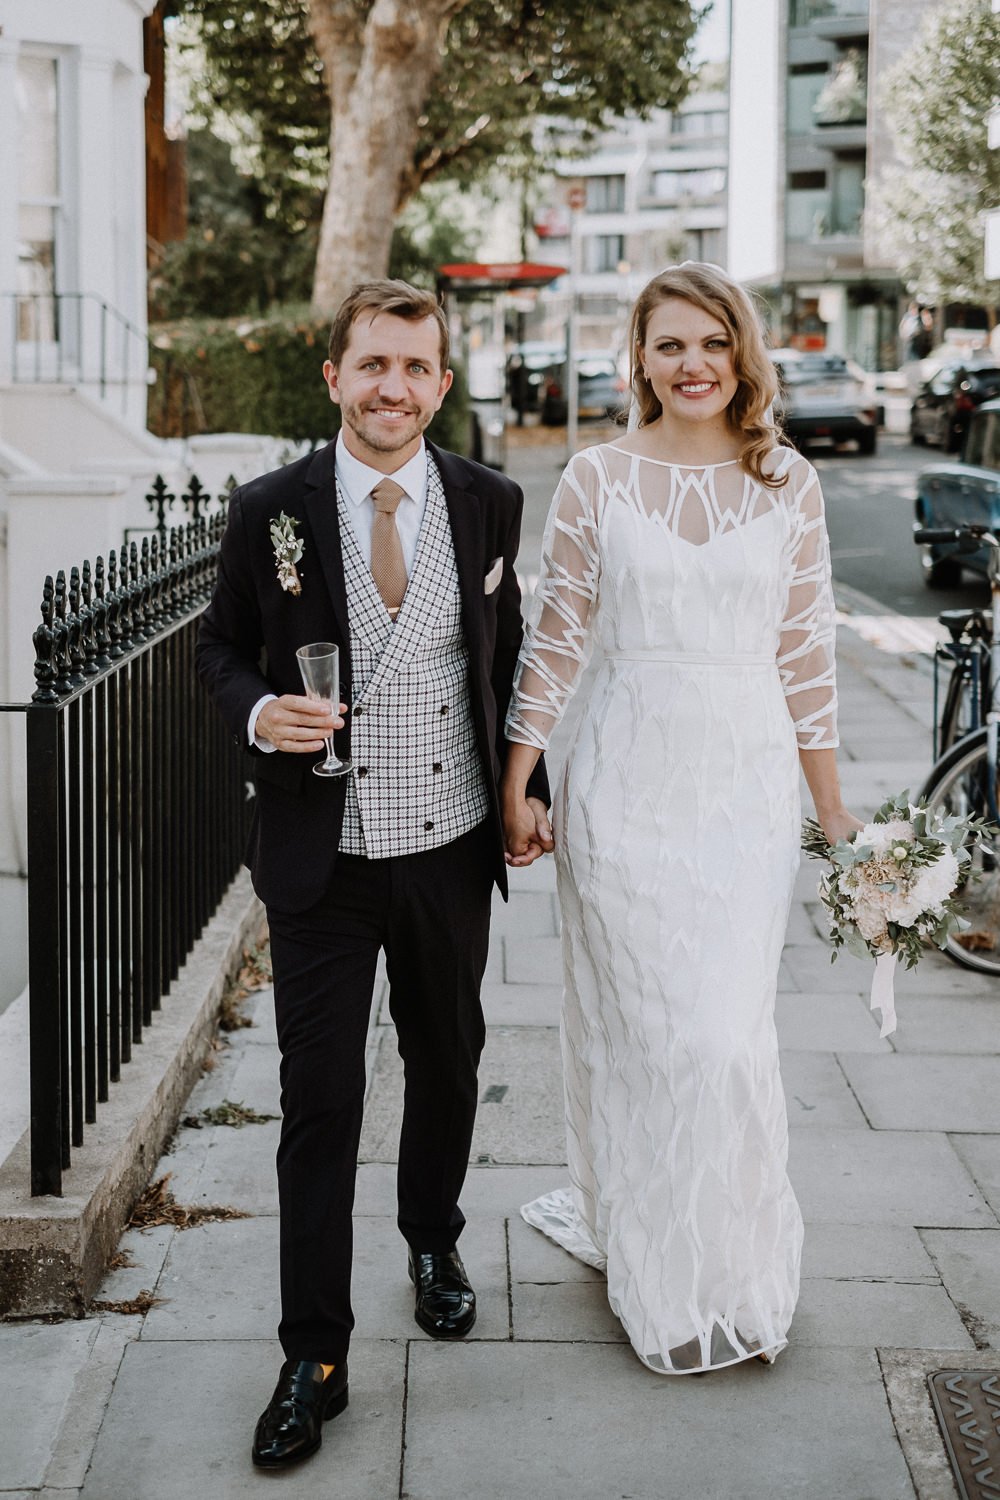 Beautiful bride Chloe wore a wedding dress by Halfpenny London | Image by Caitlin and Jones (http://www.caitlinandjones.co.uk/)